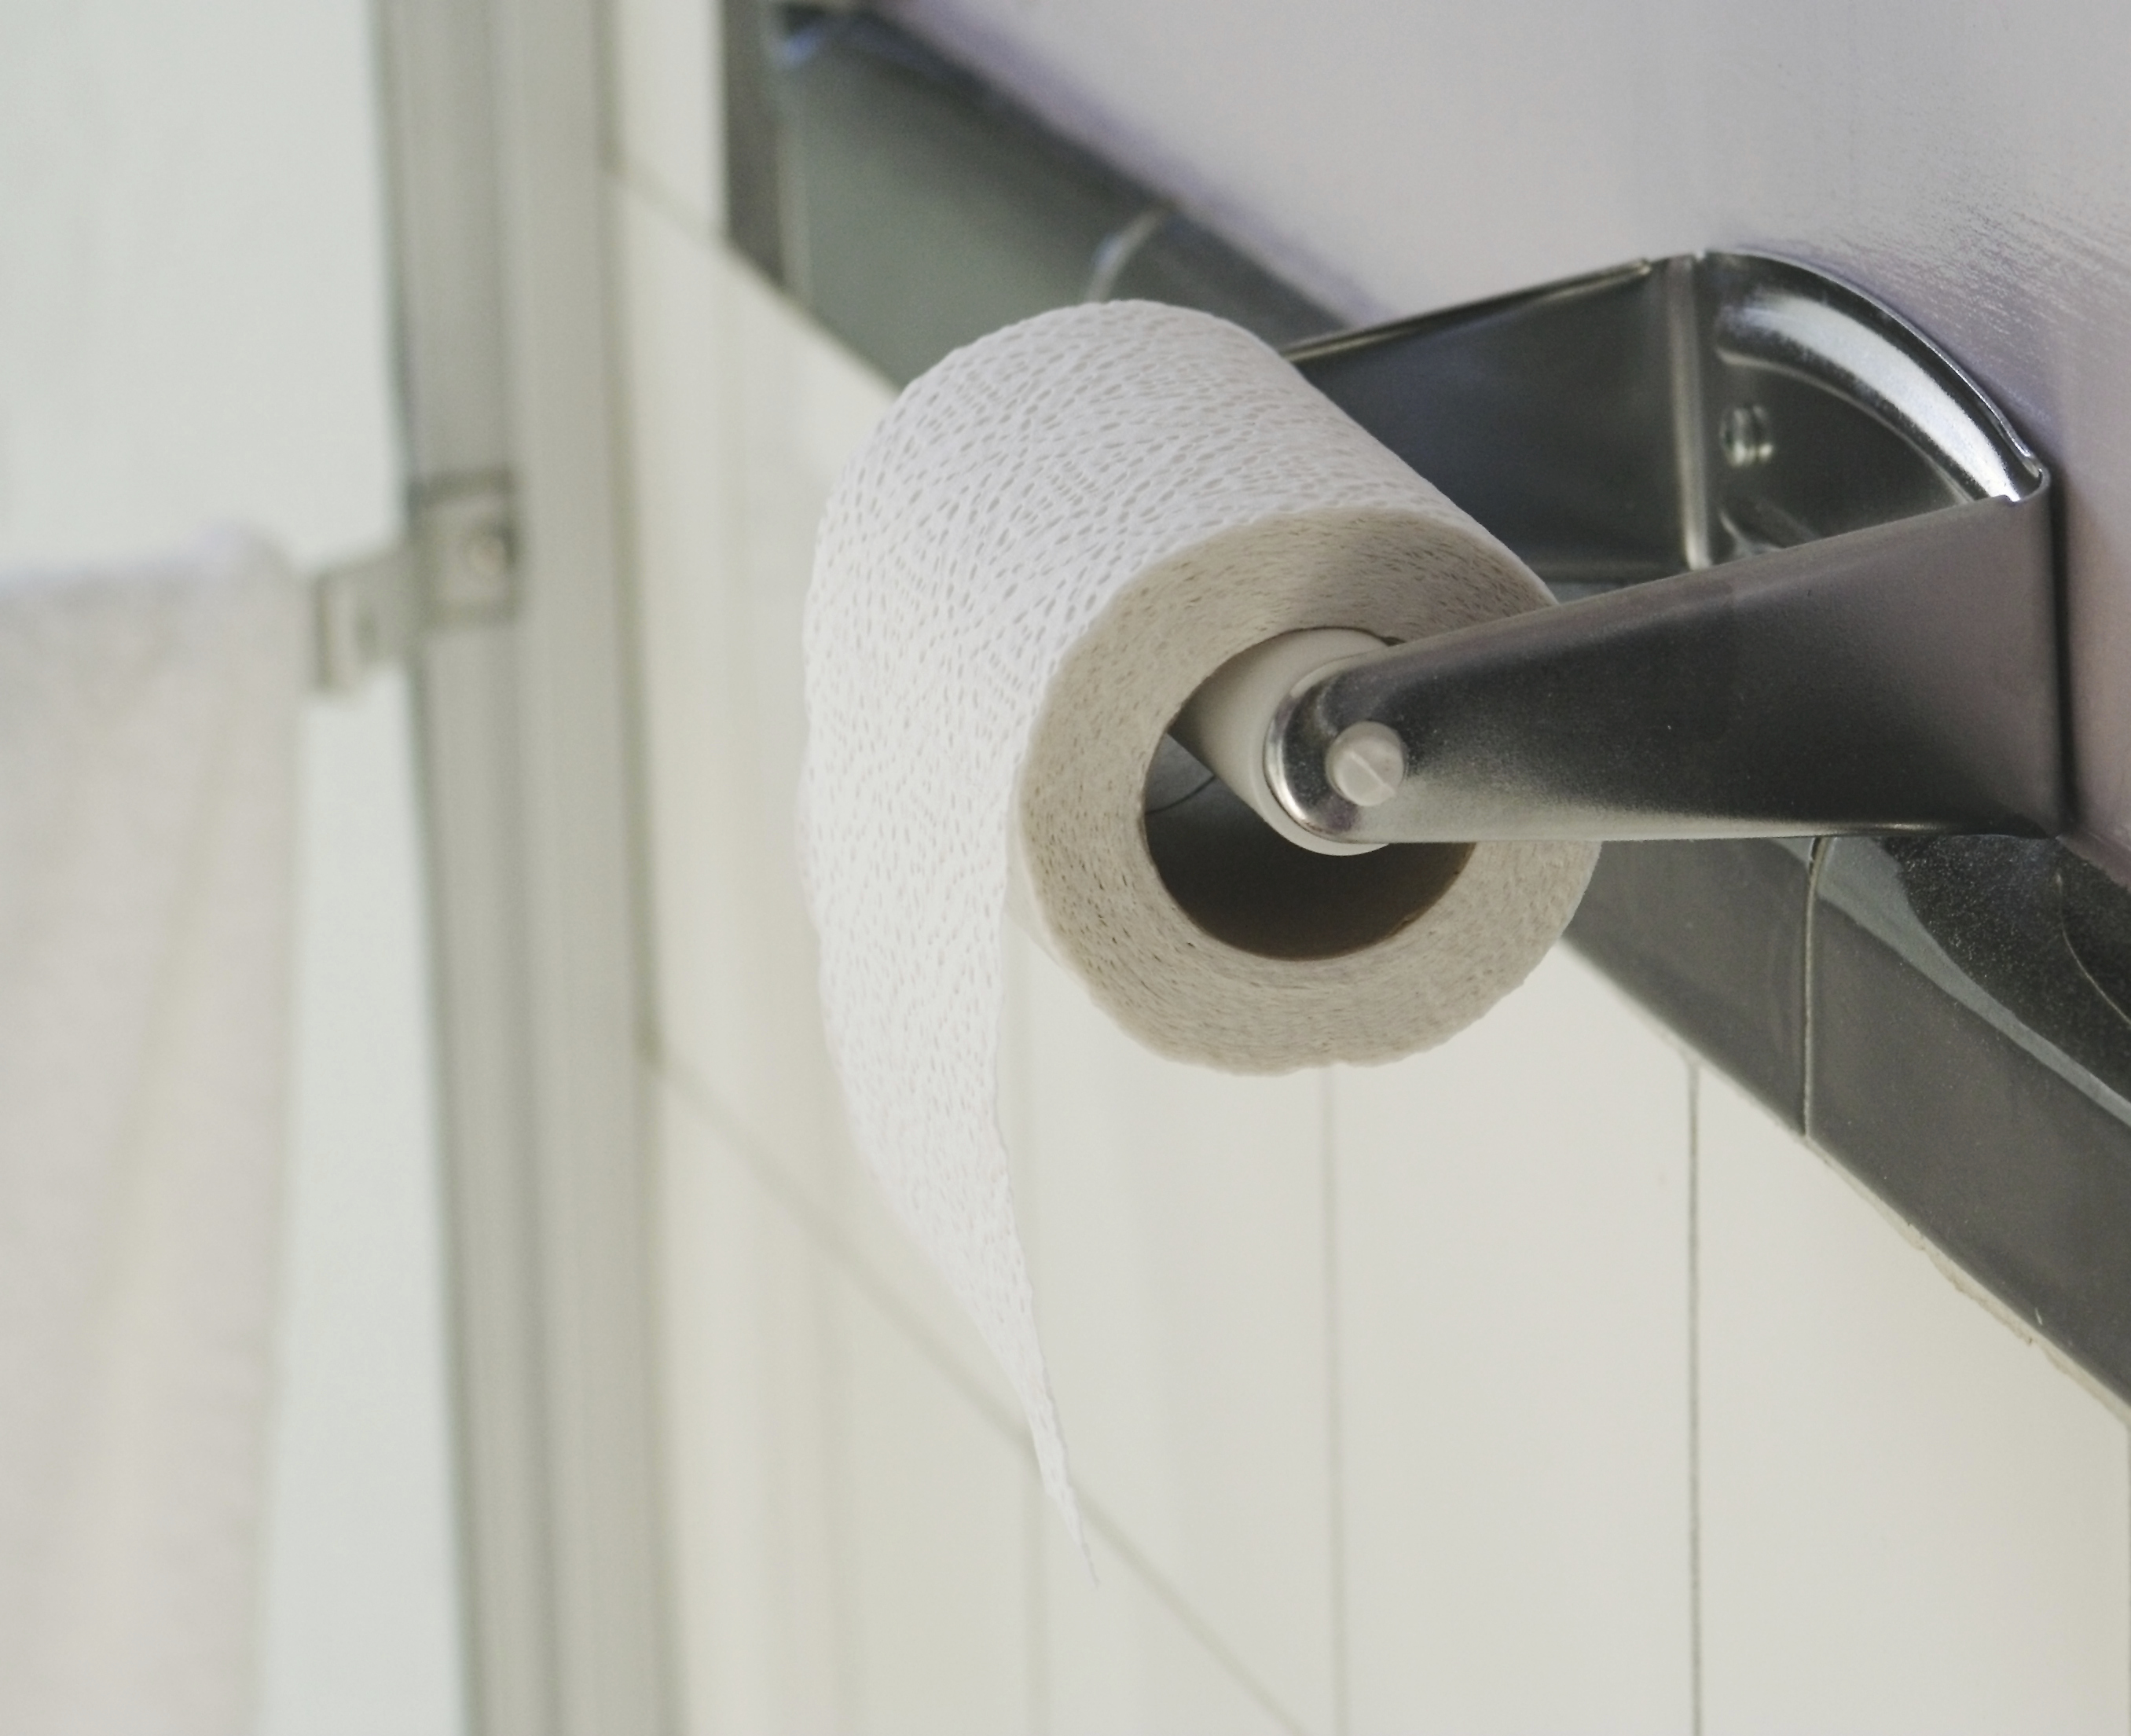 DIY Toilet Paper Holders to Make for Your Home